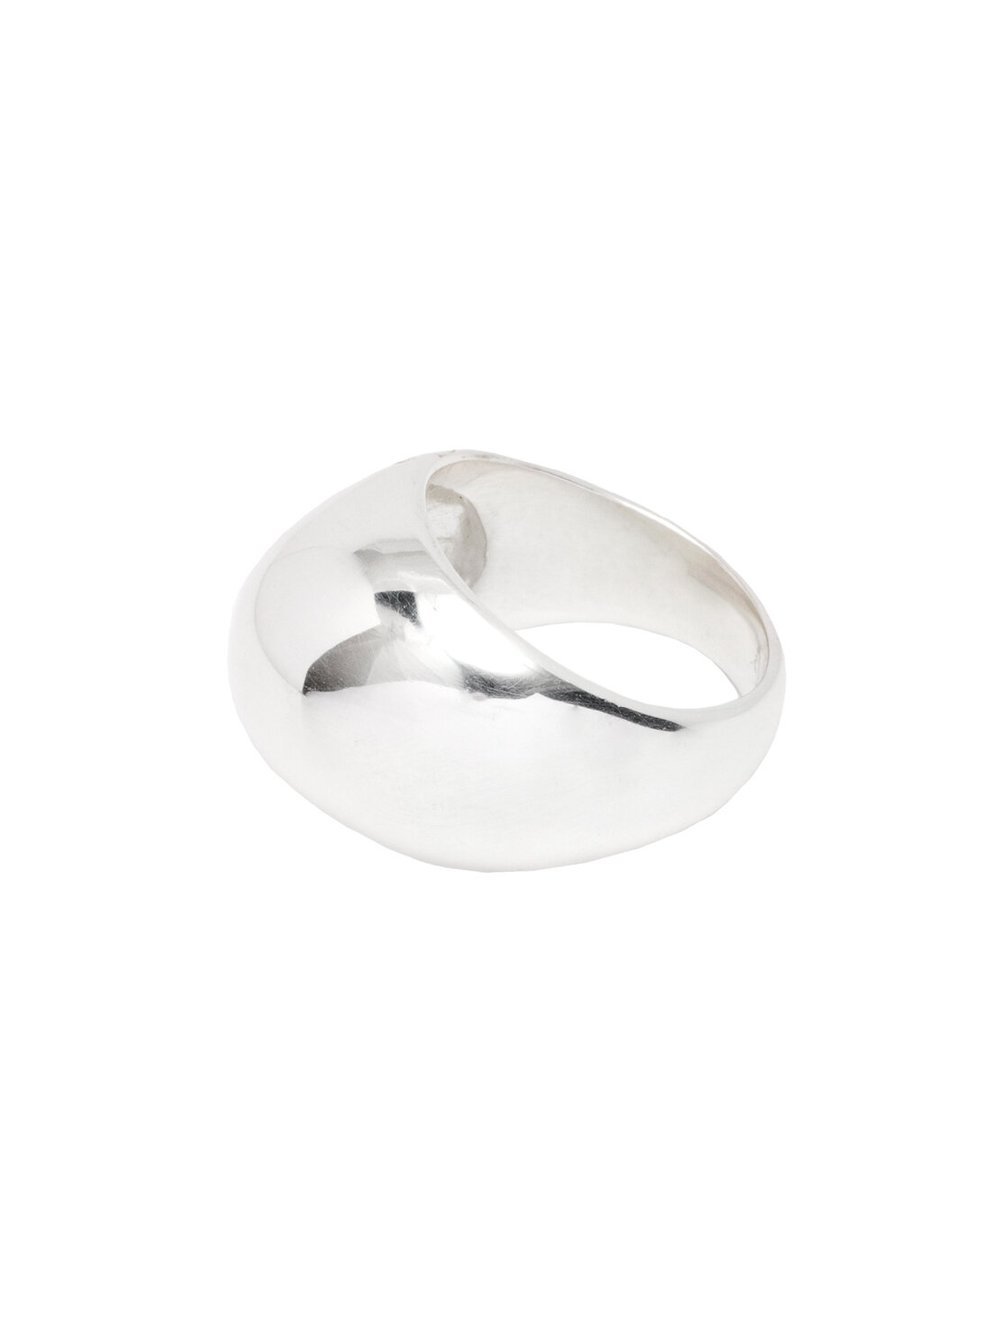 The Silver Egg Ring